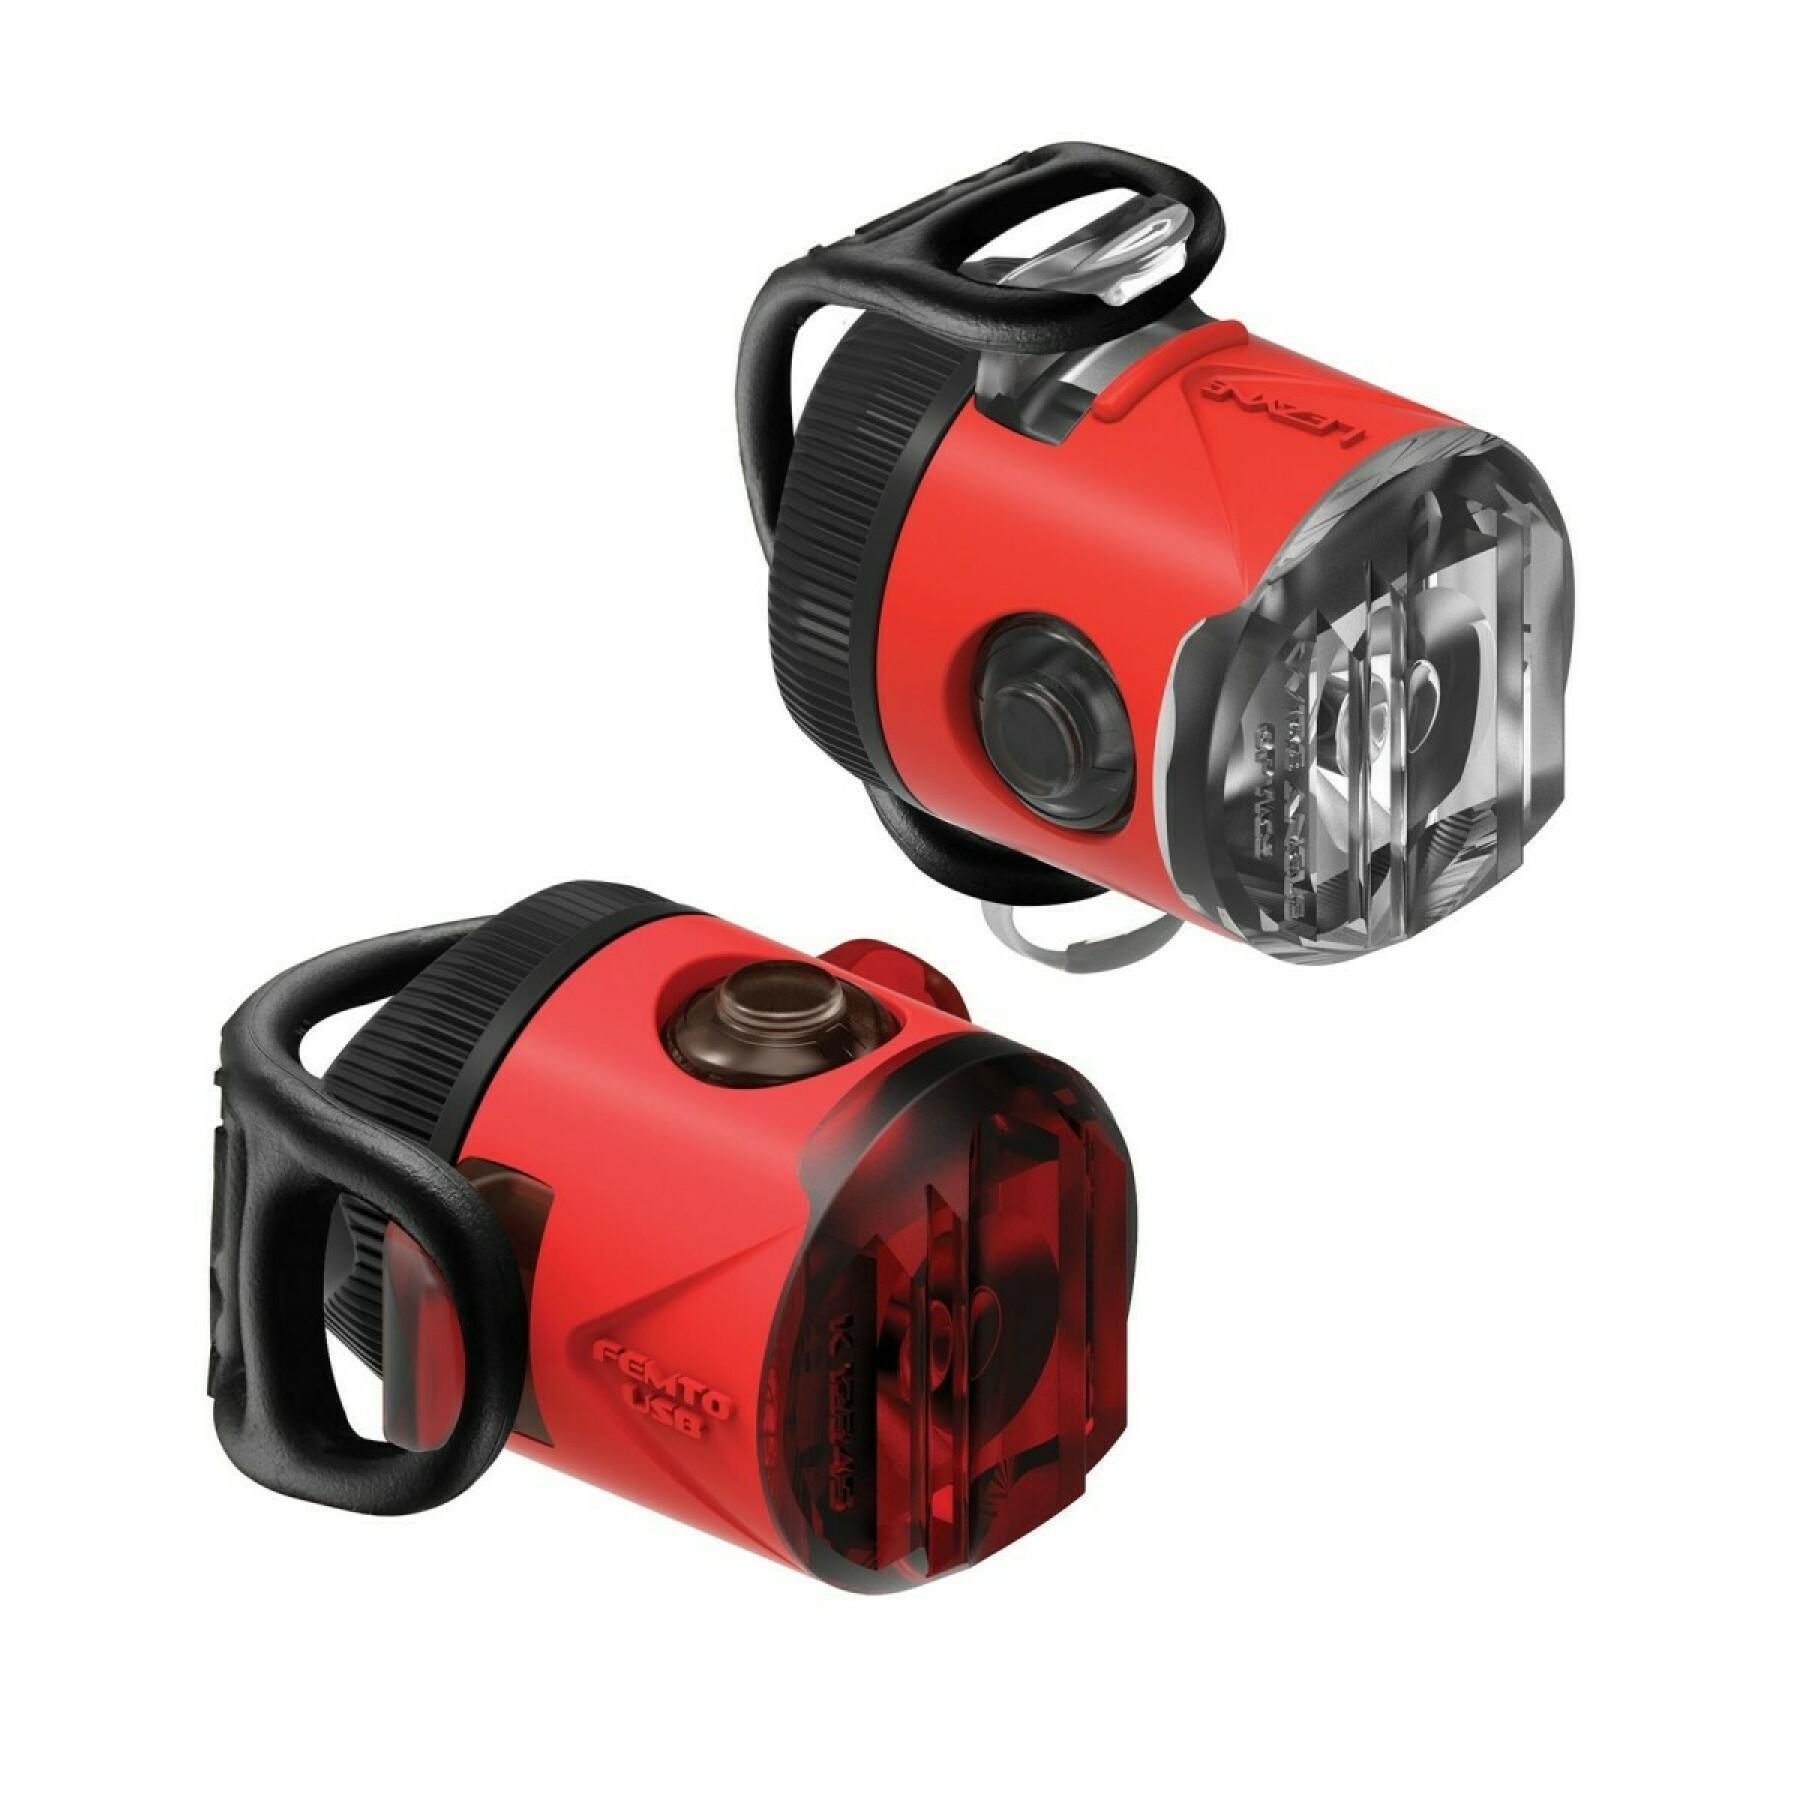 Pair of rechargeable lights Lezyne Femto USB Drive